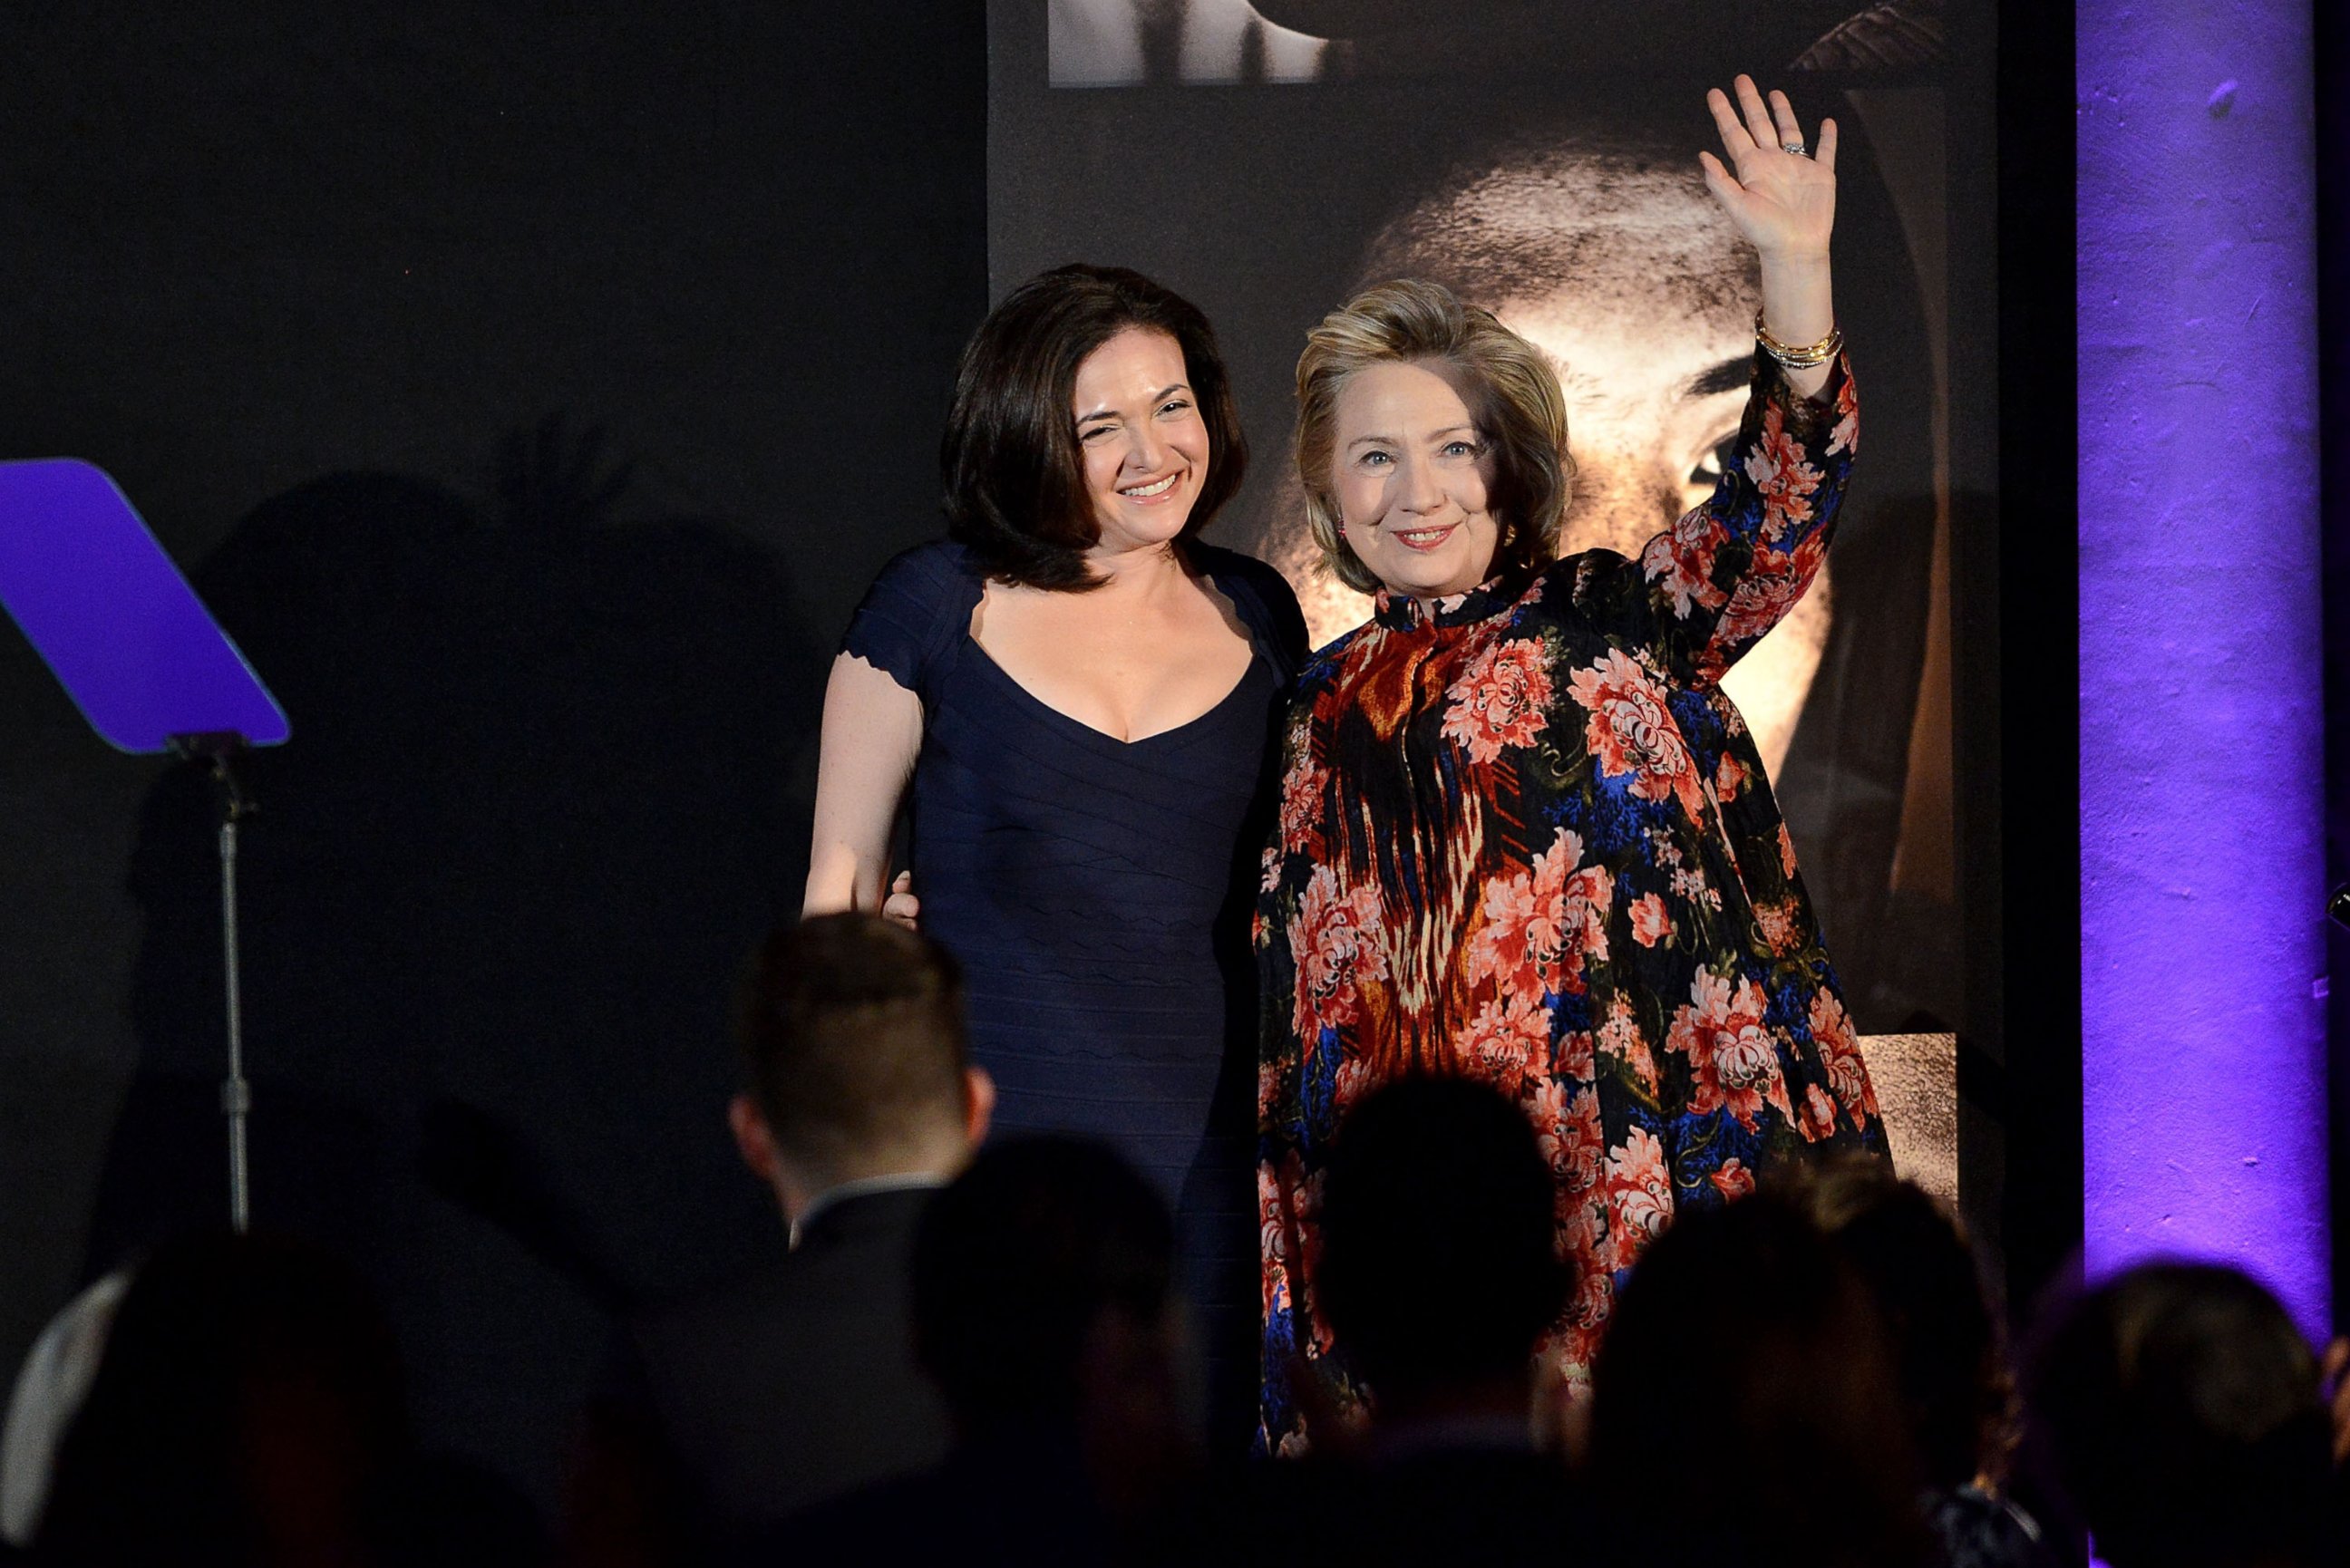 PHOTO: Sheryl Sandberg and Hillary Clinton onstage at the Women for Women 20th Anniversary Gala celebration at the American Museum of Natural History, Dec. 3, 2013 in New York.